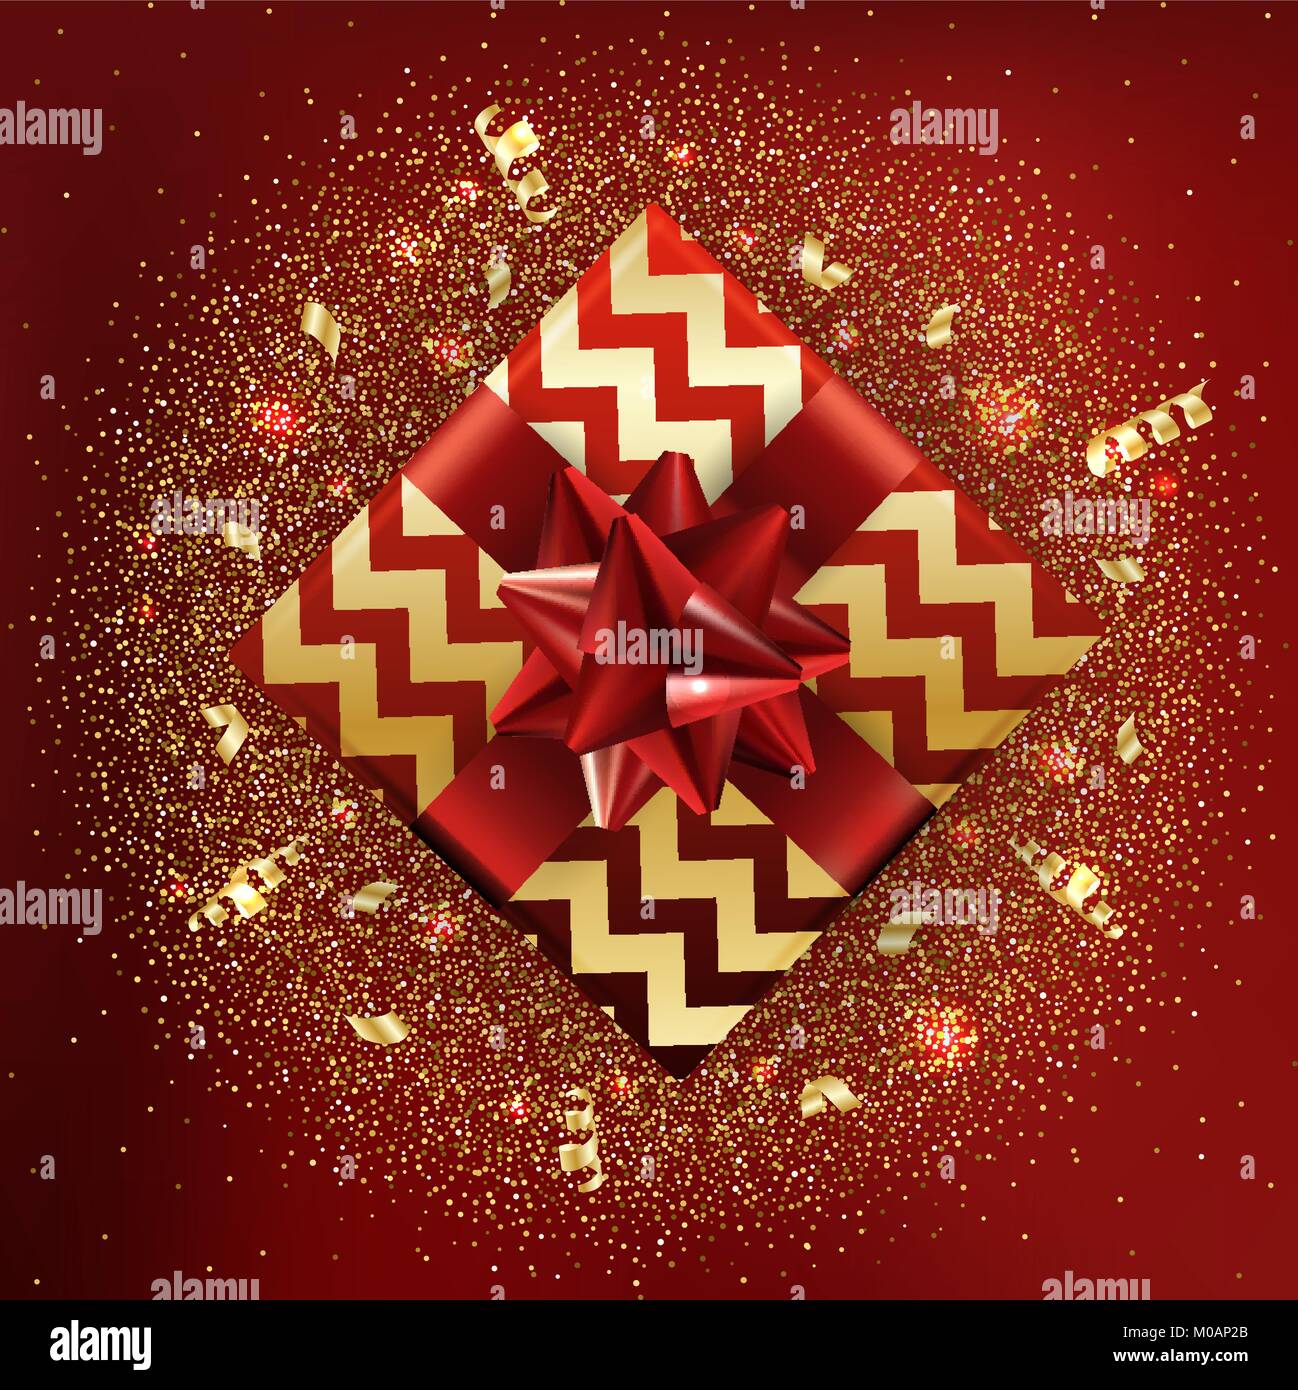 Gold gift boxes and confetti on red background. Birthday template. Stock Vector